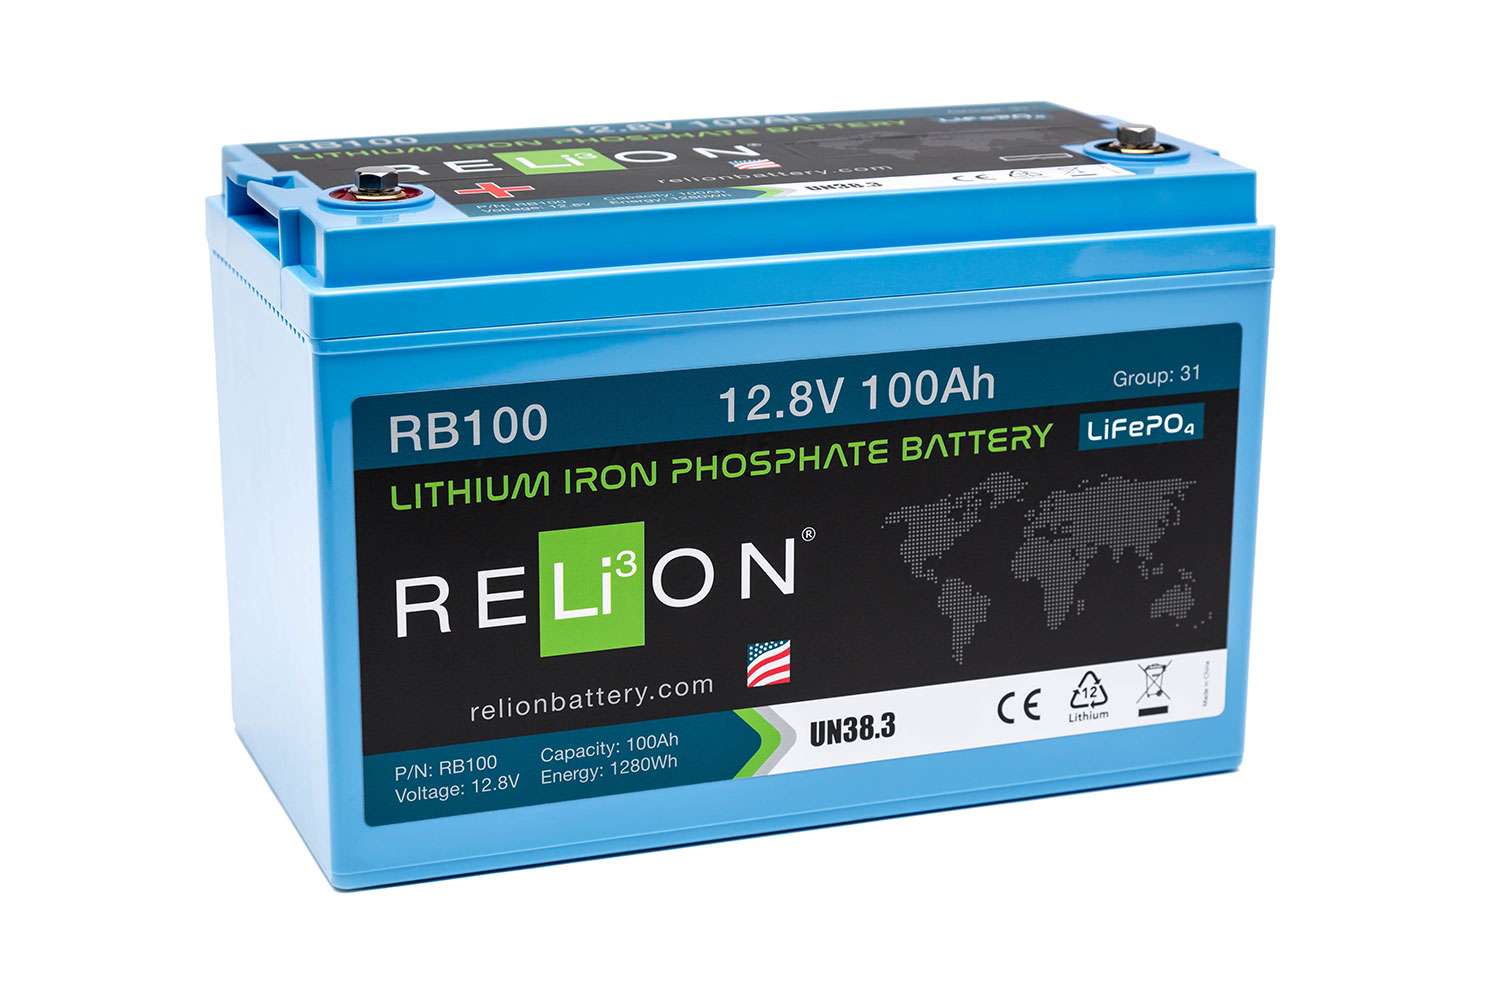 <p><b>RELiON Lithium Marine Batteries</b></p>
Long-lasting RELiON lithium iron phosphate (LiFePO4) batteries fit all types of watercraft and deliver the dependable power for everything you need. RELiON batteries offer more power than traditional lead-acid batteries and are typically half the weight, making for better acceleration and more agility on the water. Transform your bass boat with a lightweight, efficient, and powerful alternative that will keep you feeling confident that youâll have enough power to make it through those long days on the water.<br>
<p><b>MSRP: $650-$1,300</b></p>
<a href=